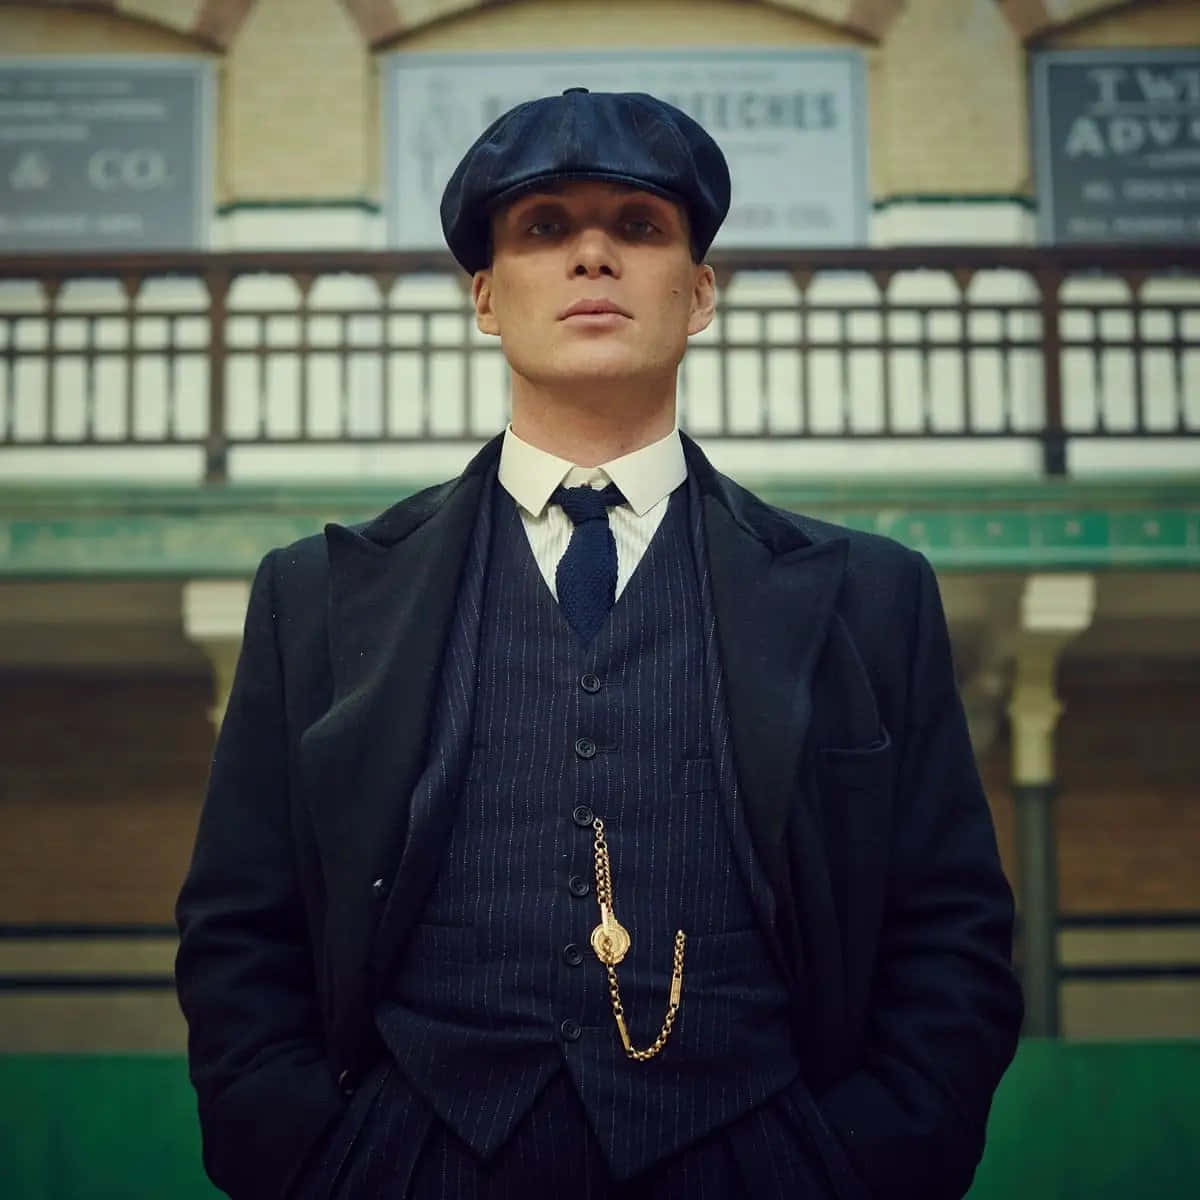 Tommy Shelby (Cillian Murphy) leads the Peaky Blinders gang in Birmingham, England